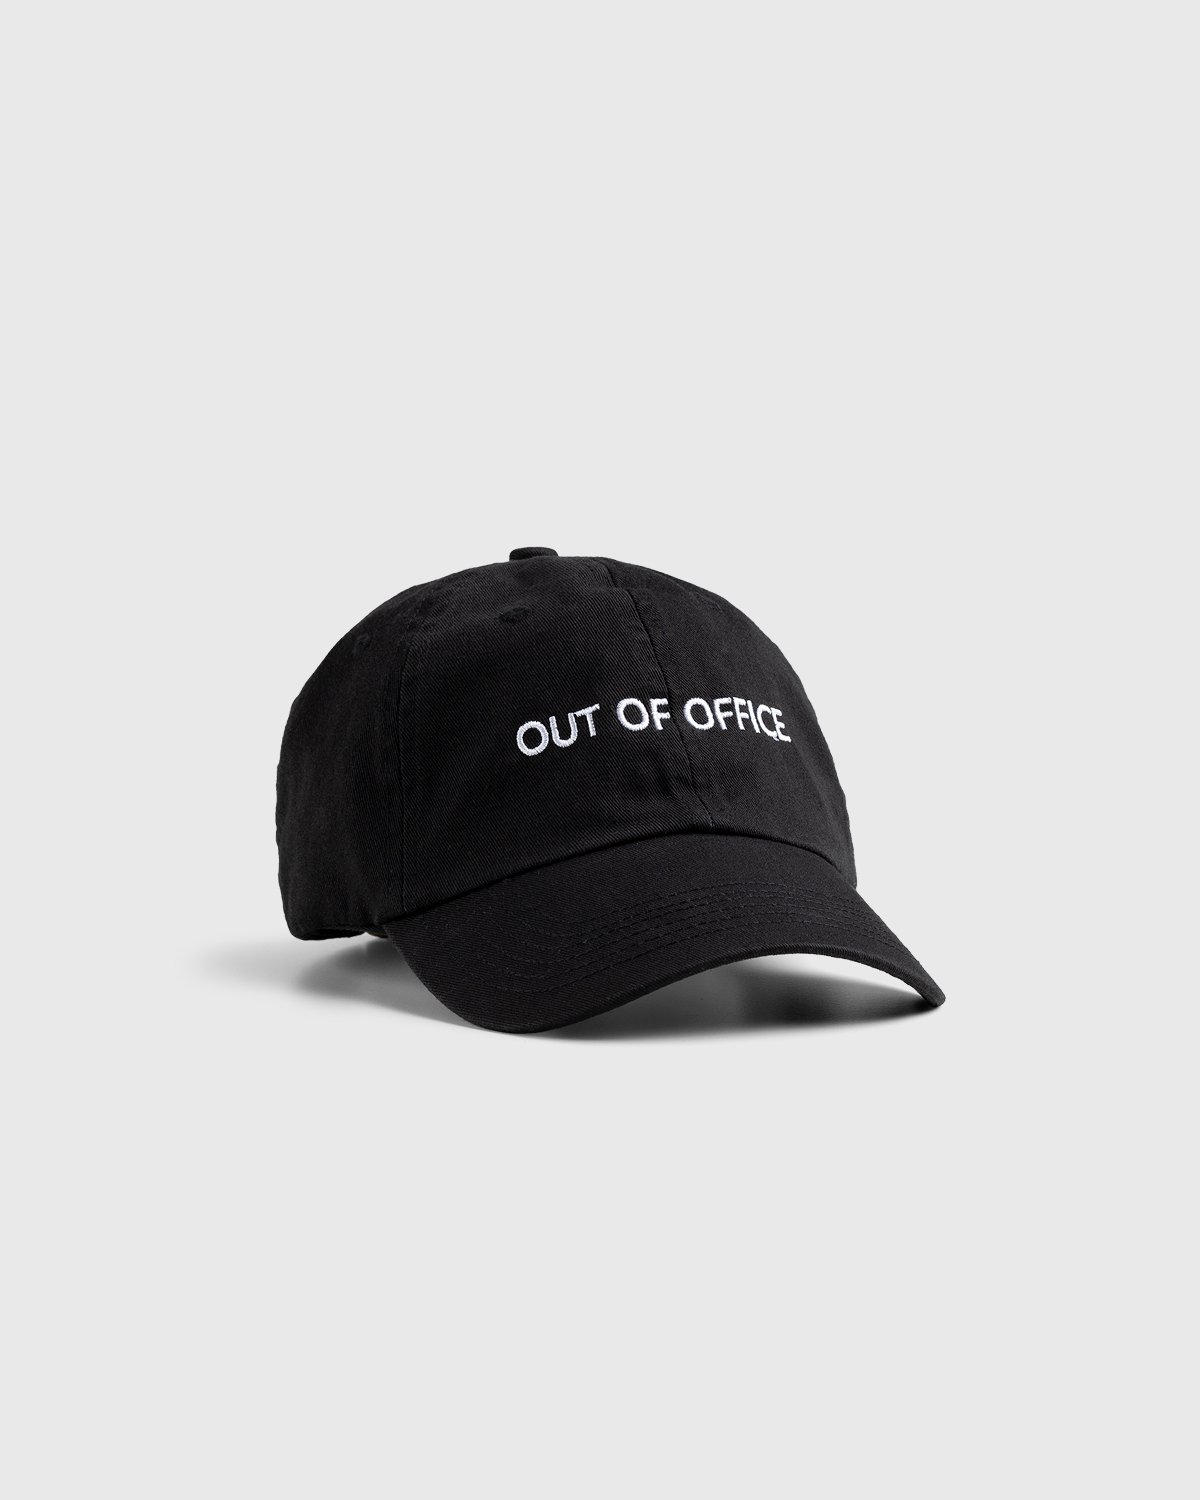 HO HO COCO - Out of Office Cap Black - Accessories - Black - Image 1